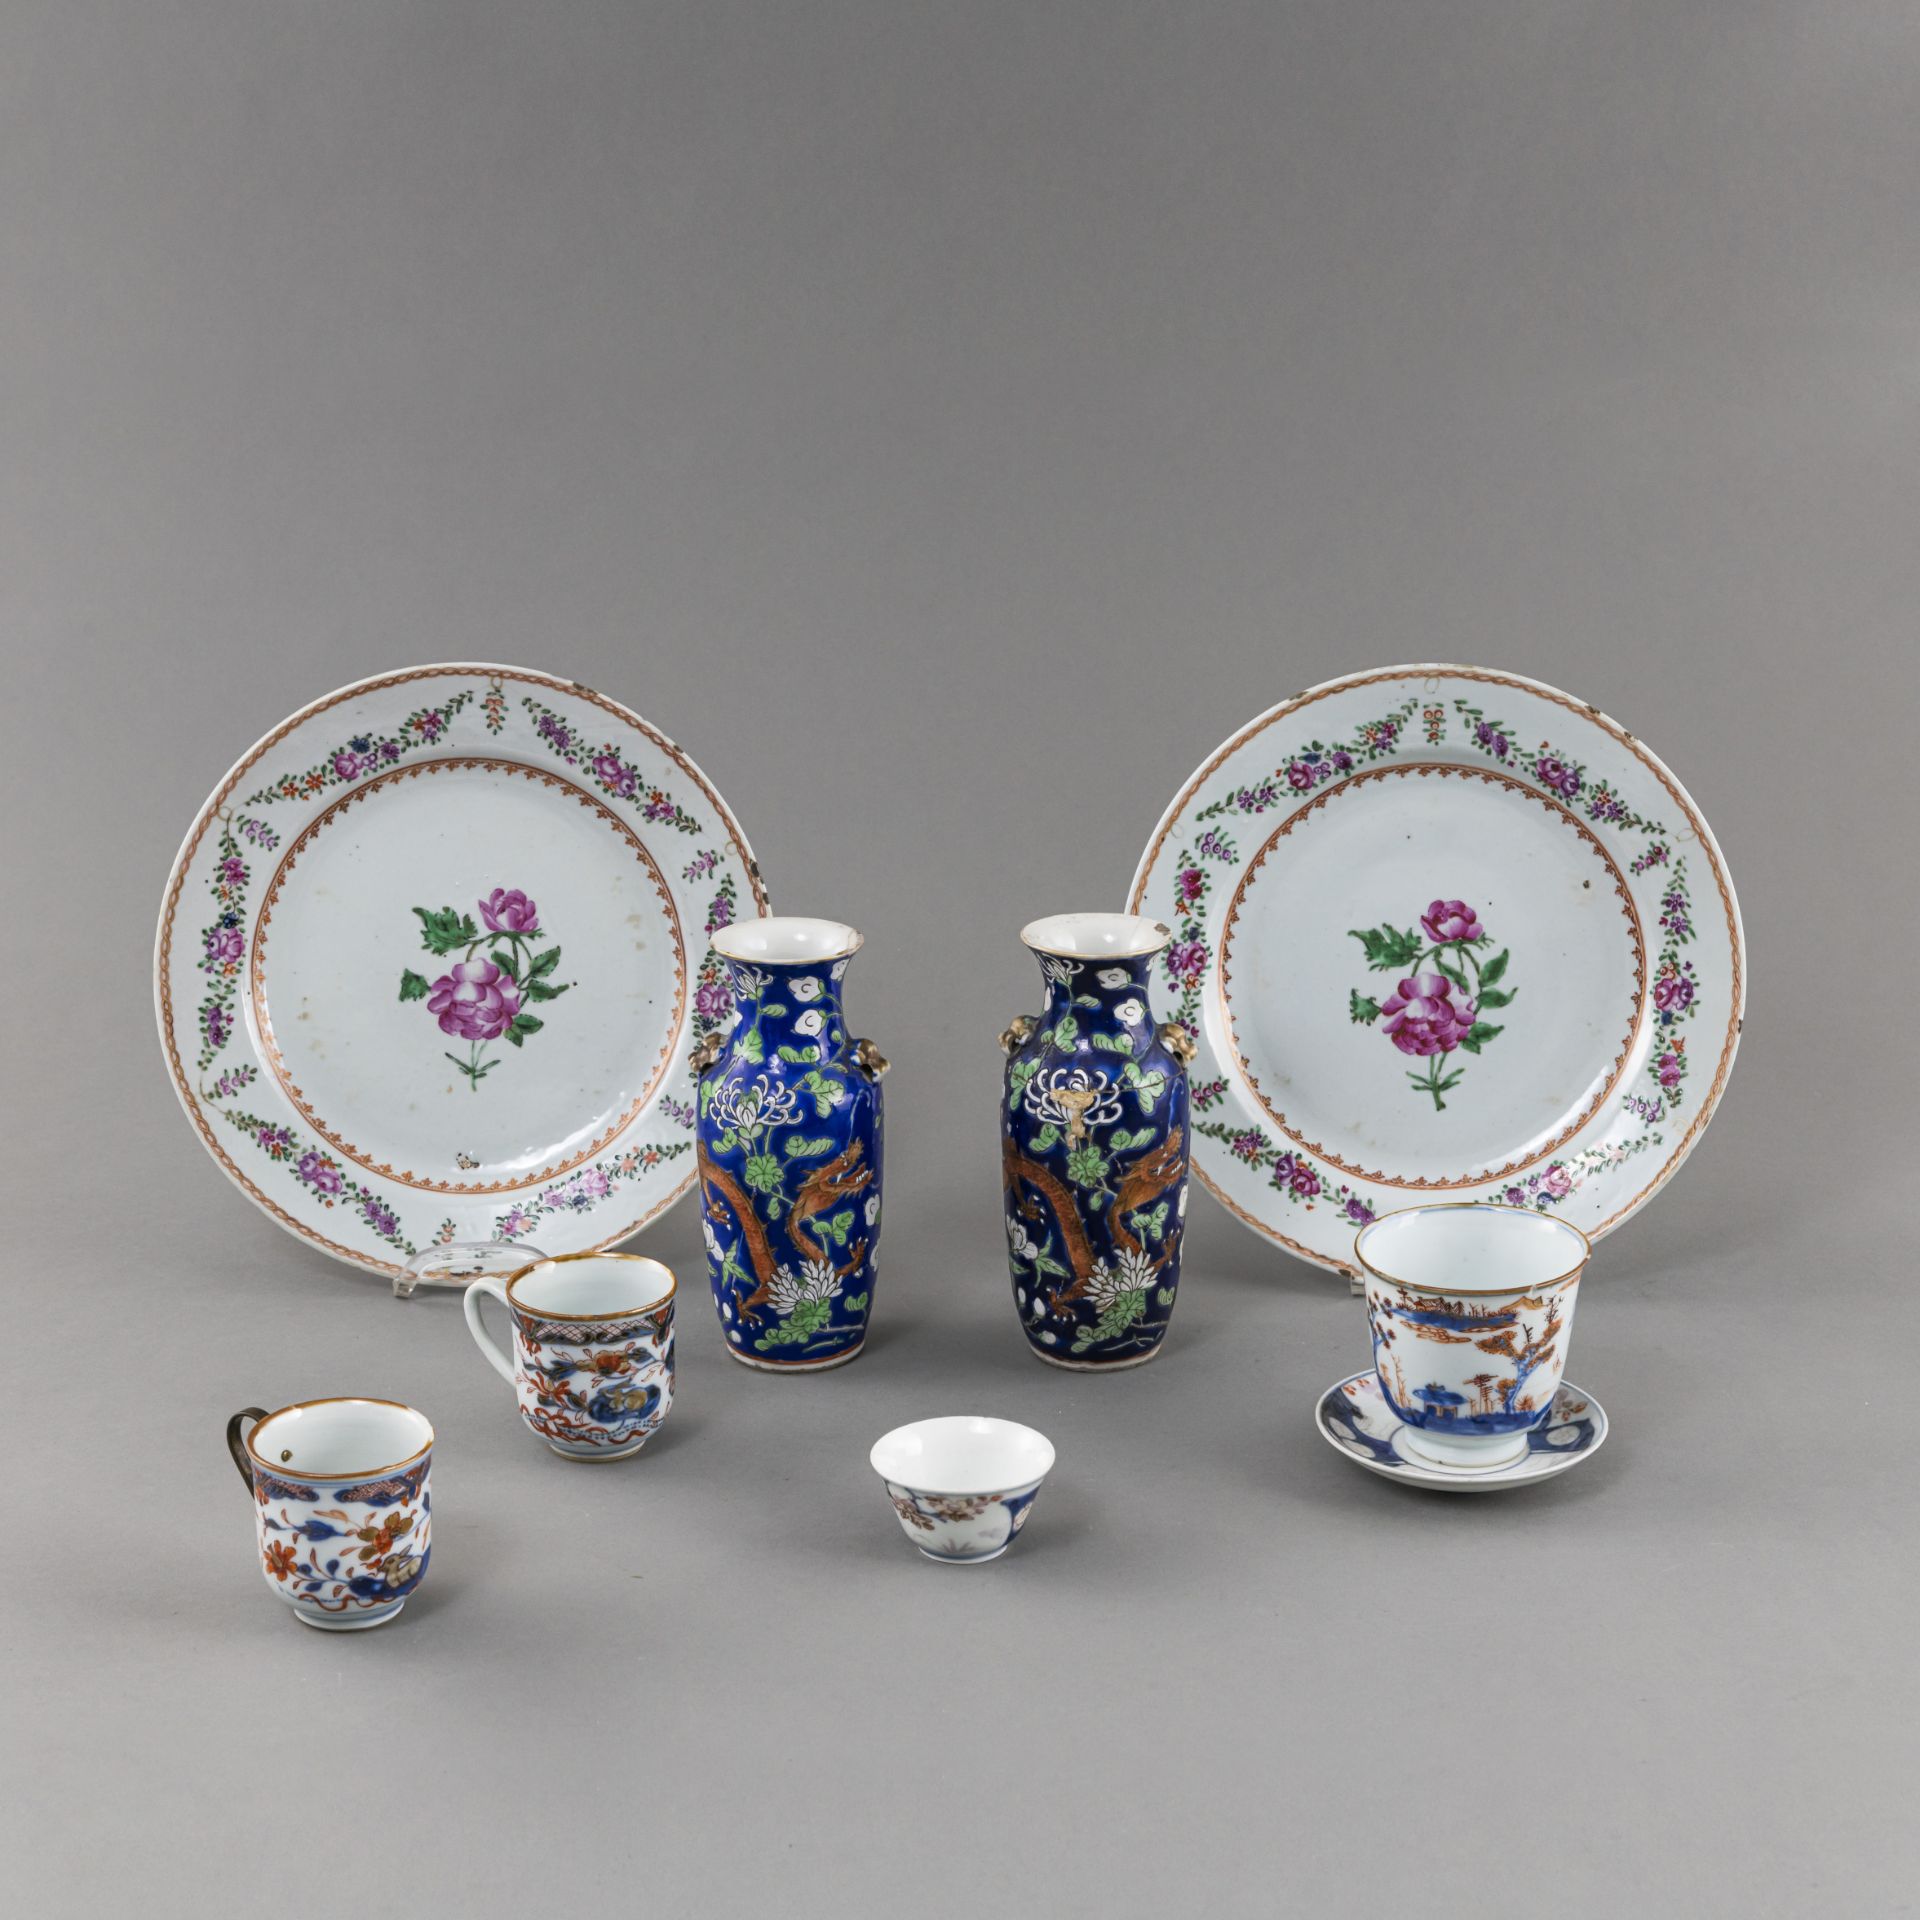 GROUP OF NINE PORCELAIN PIECES: A PAIR OF 'FAMILLE ROSE' PLATES, A PAIR OF VASES, THREE IMARI CUPS,